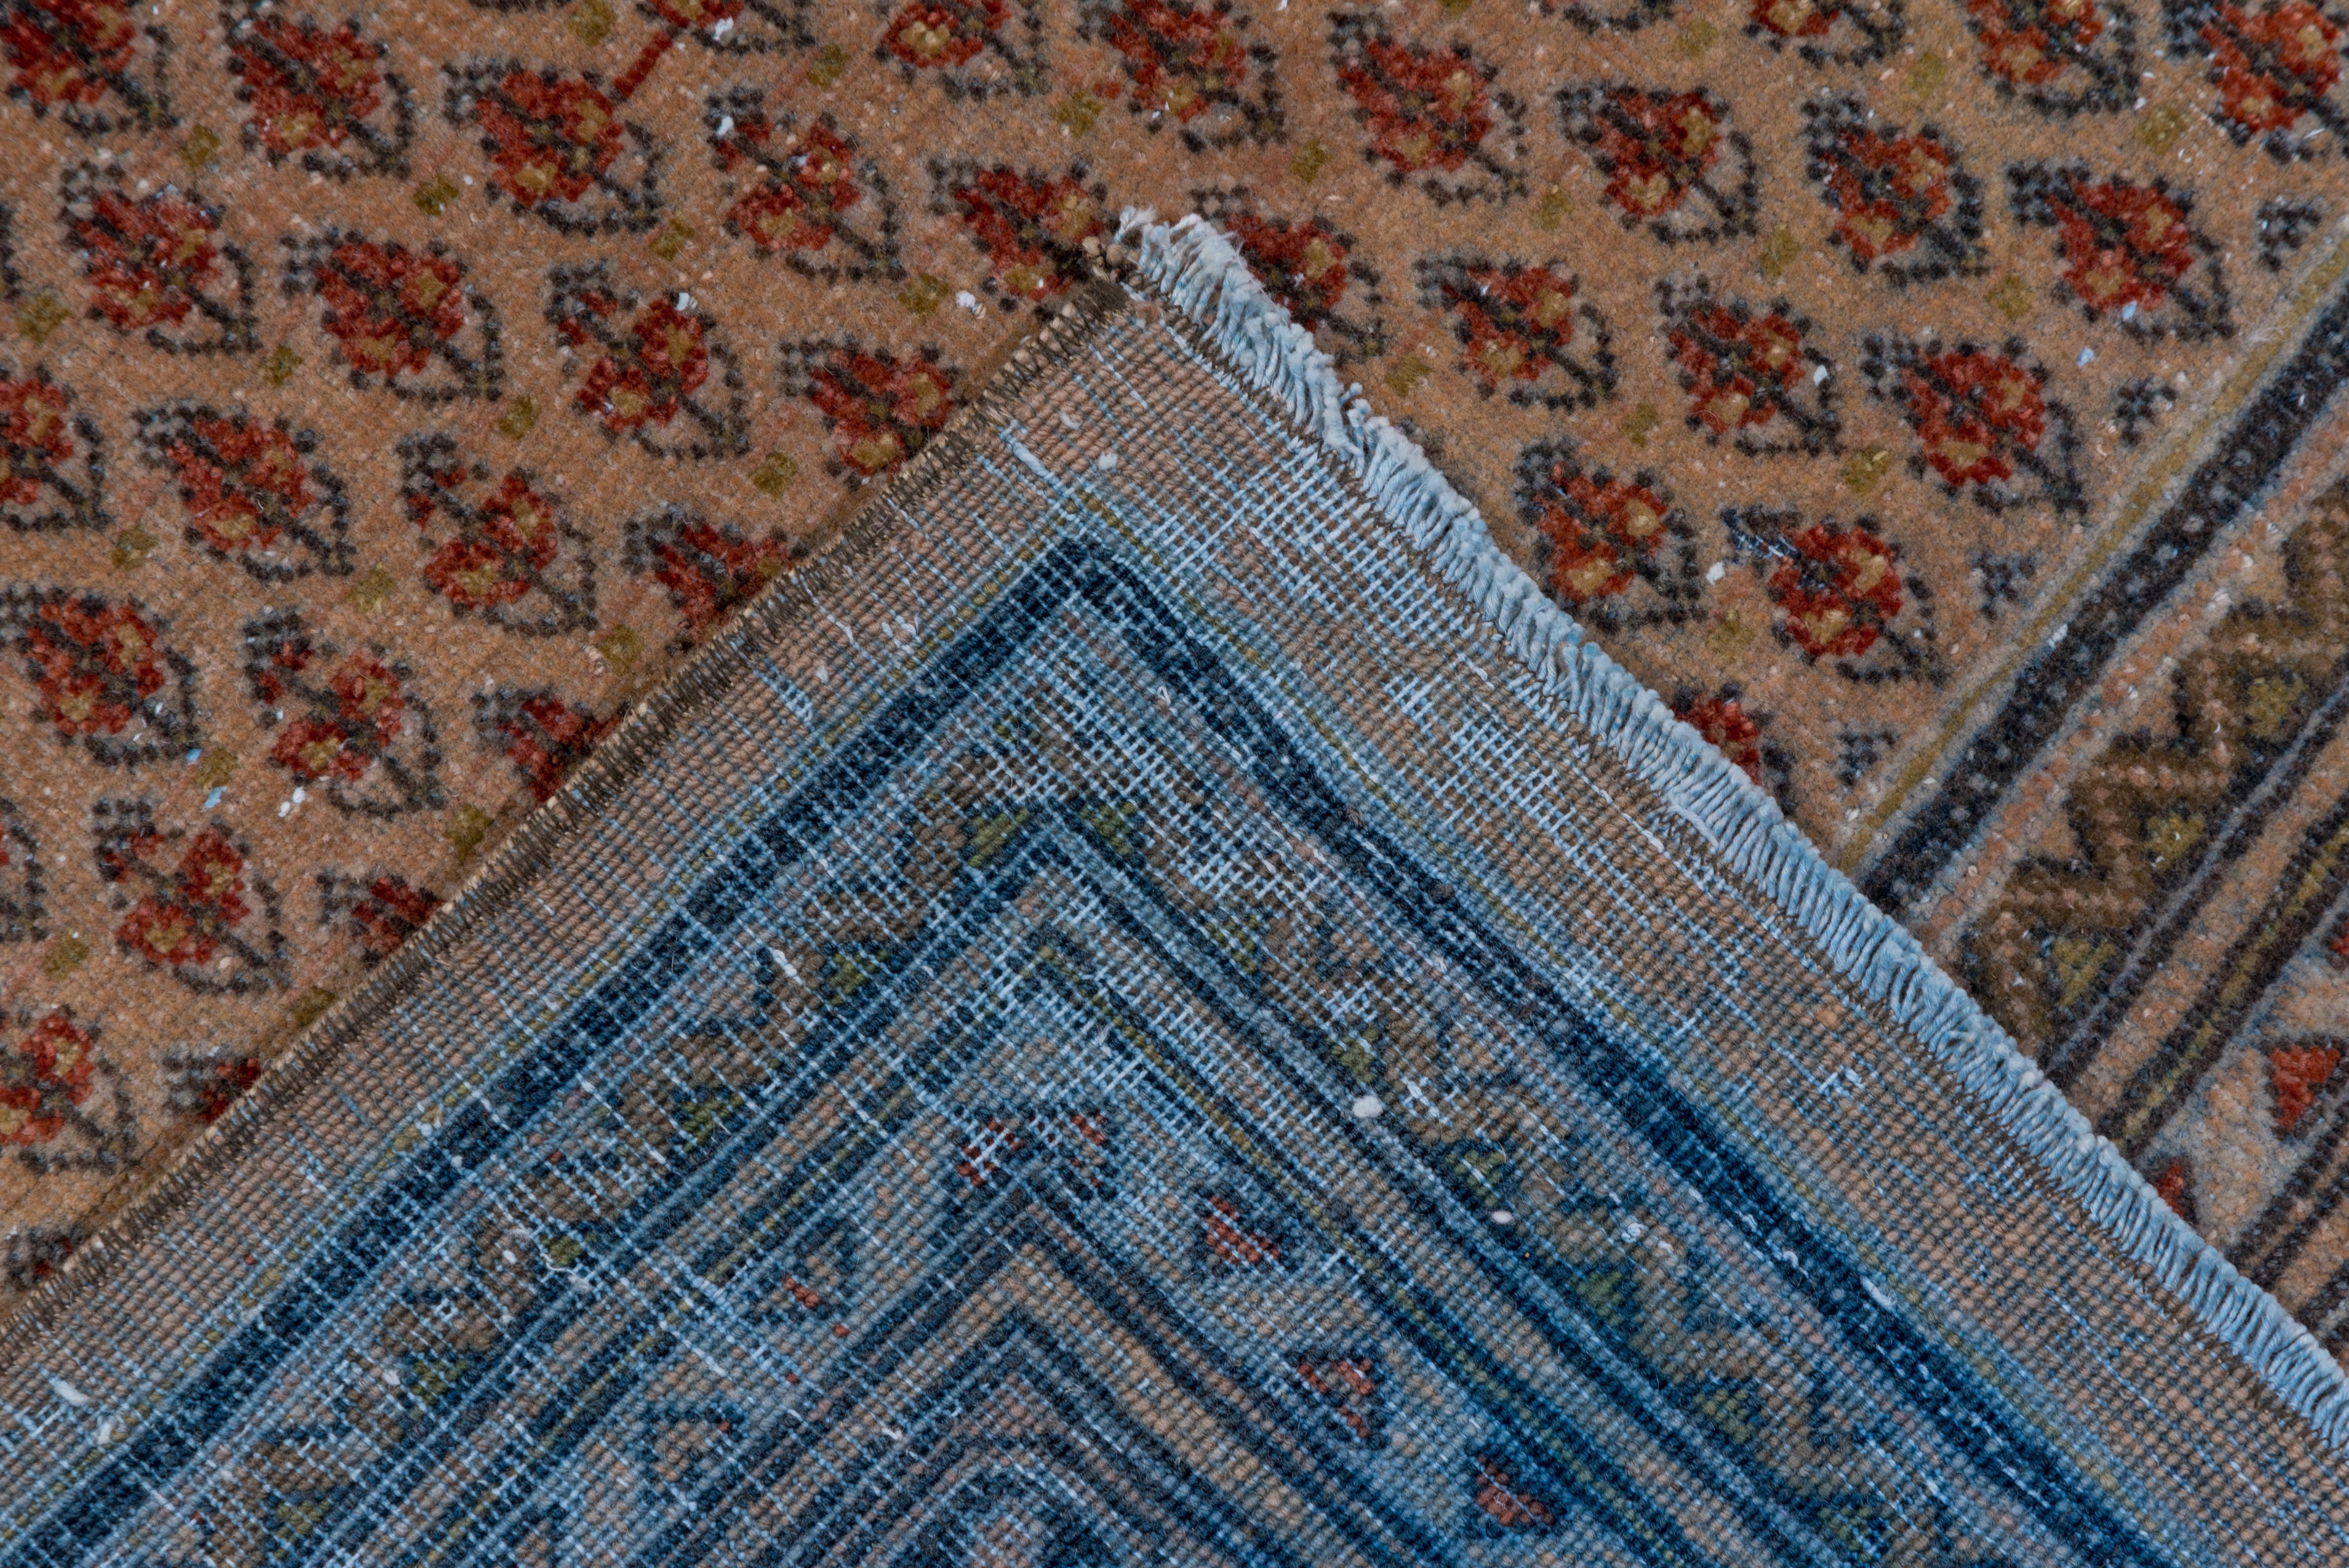 Wool Mid-20th Century Persian Saraband Carpet, Light Brown Field, Blue & Red Accents For Sale